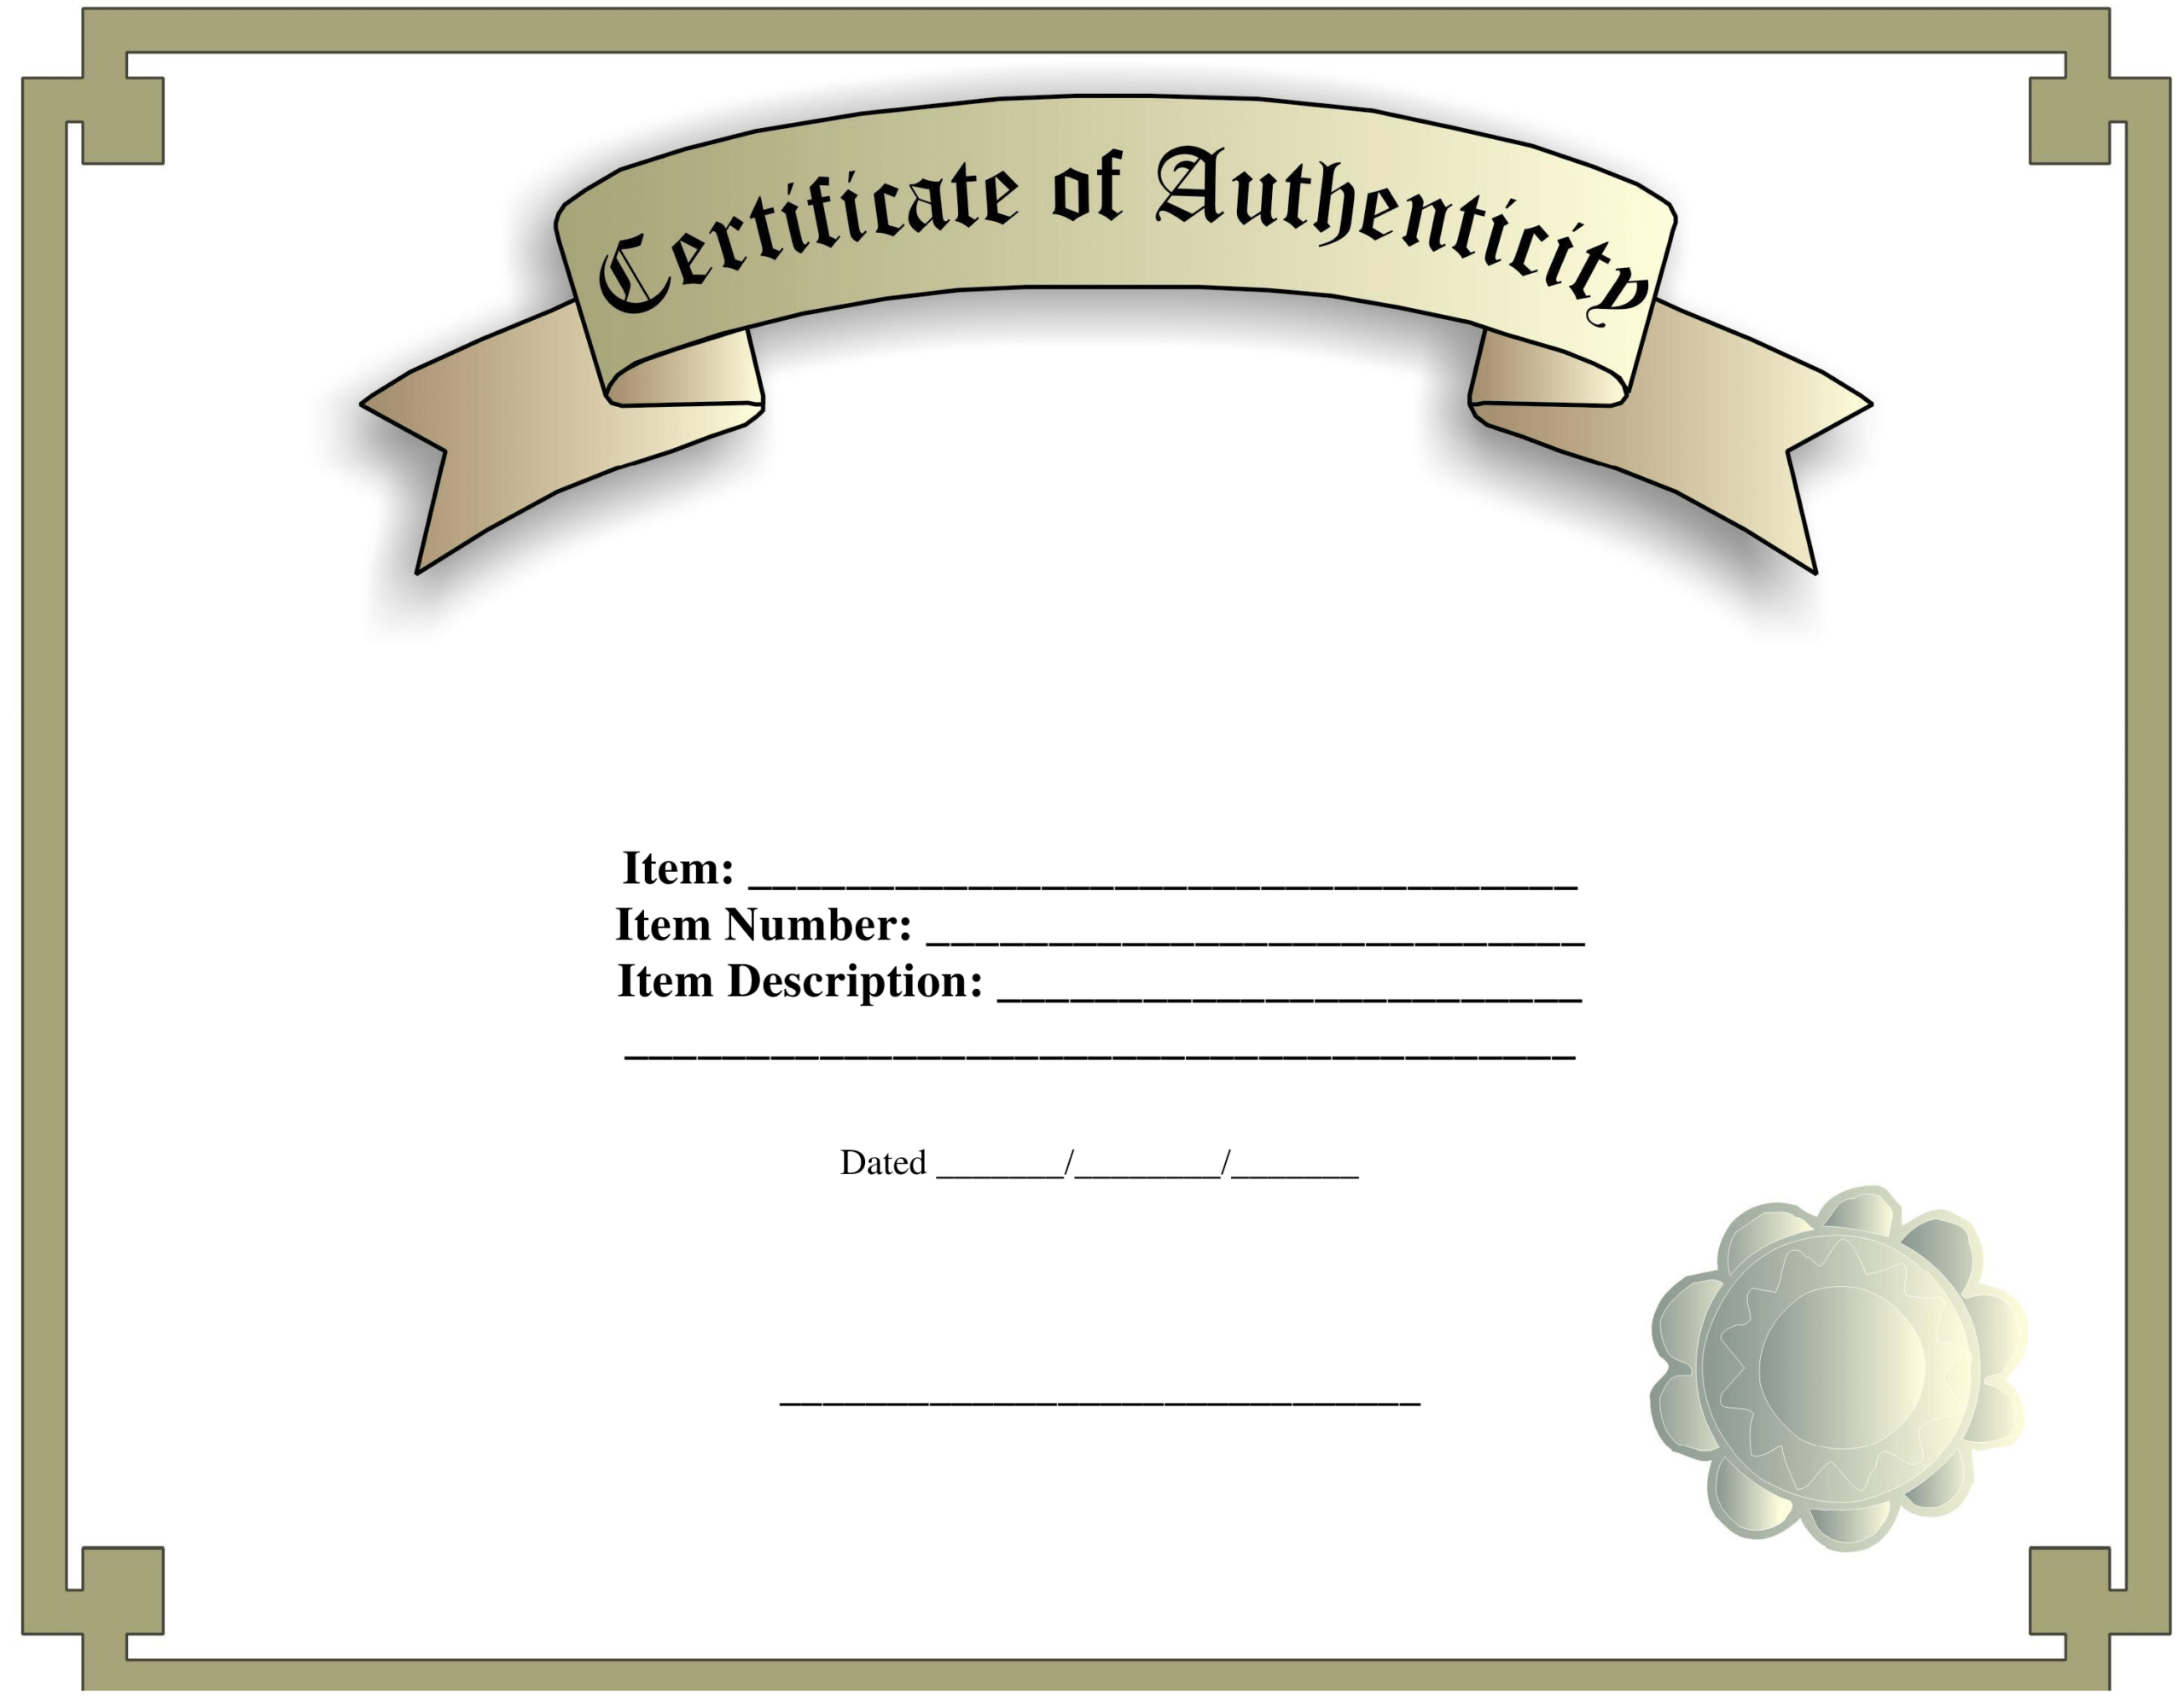 Certificate Of Authenticity Template | Templates At Inside Certificate Of Authenticity Template